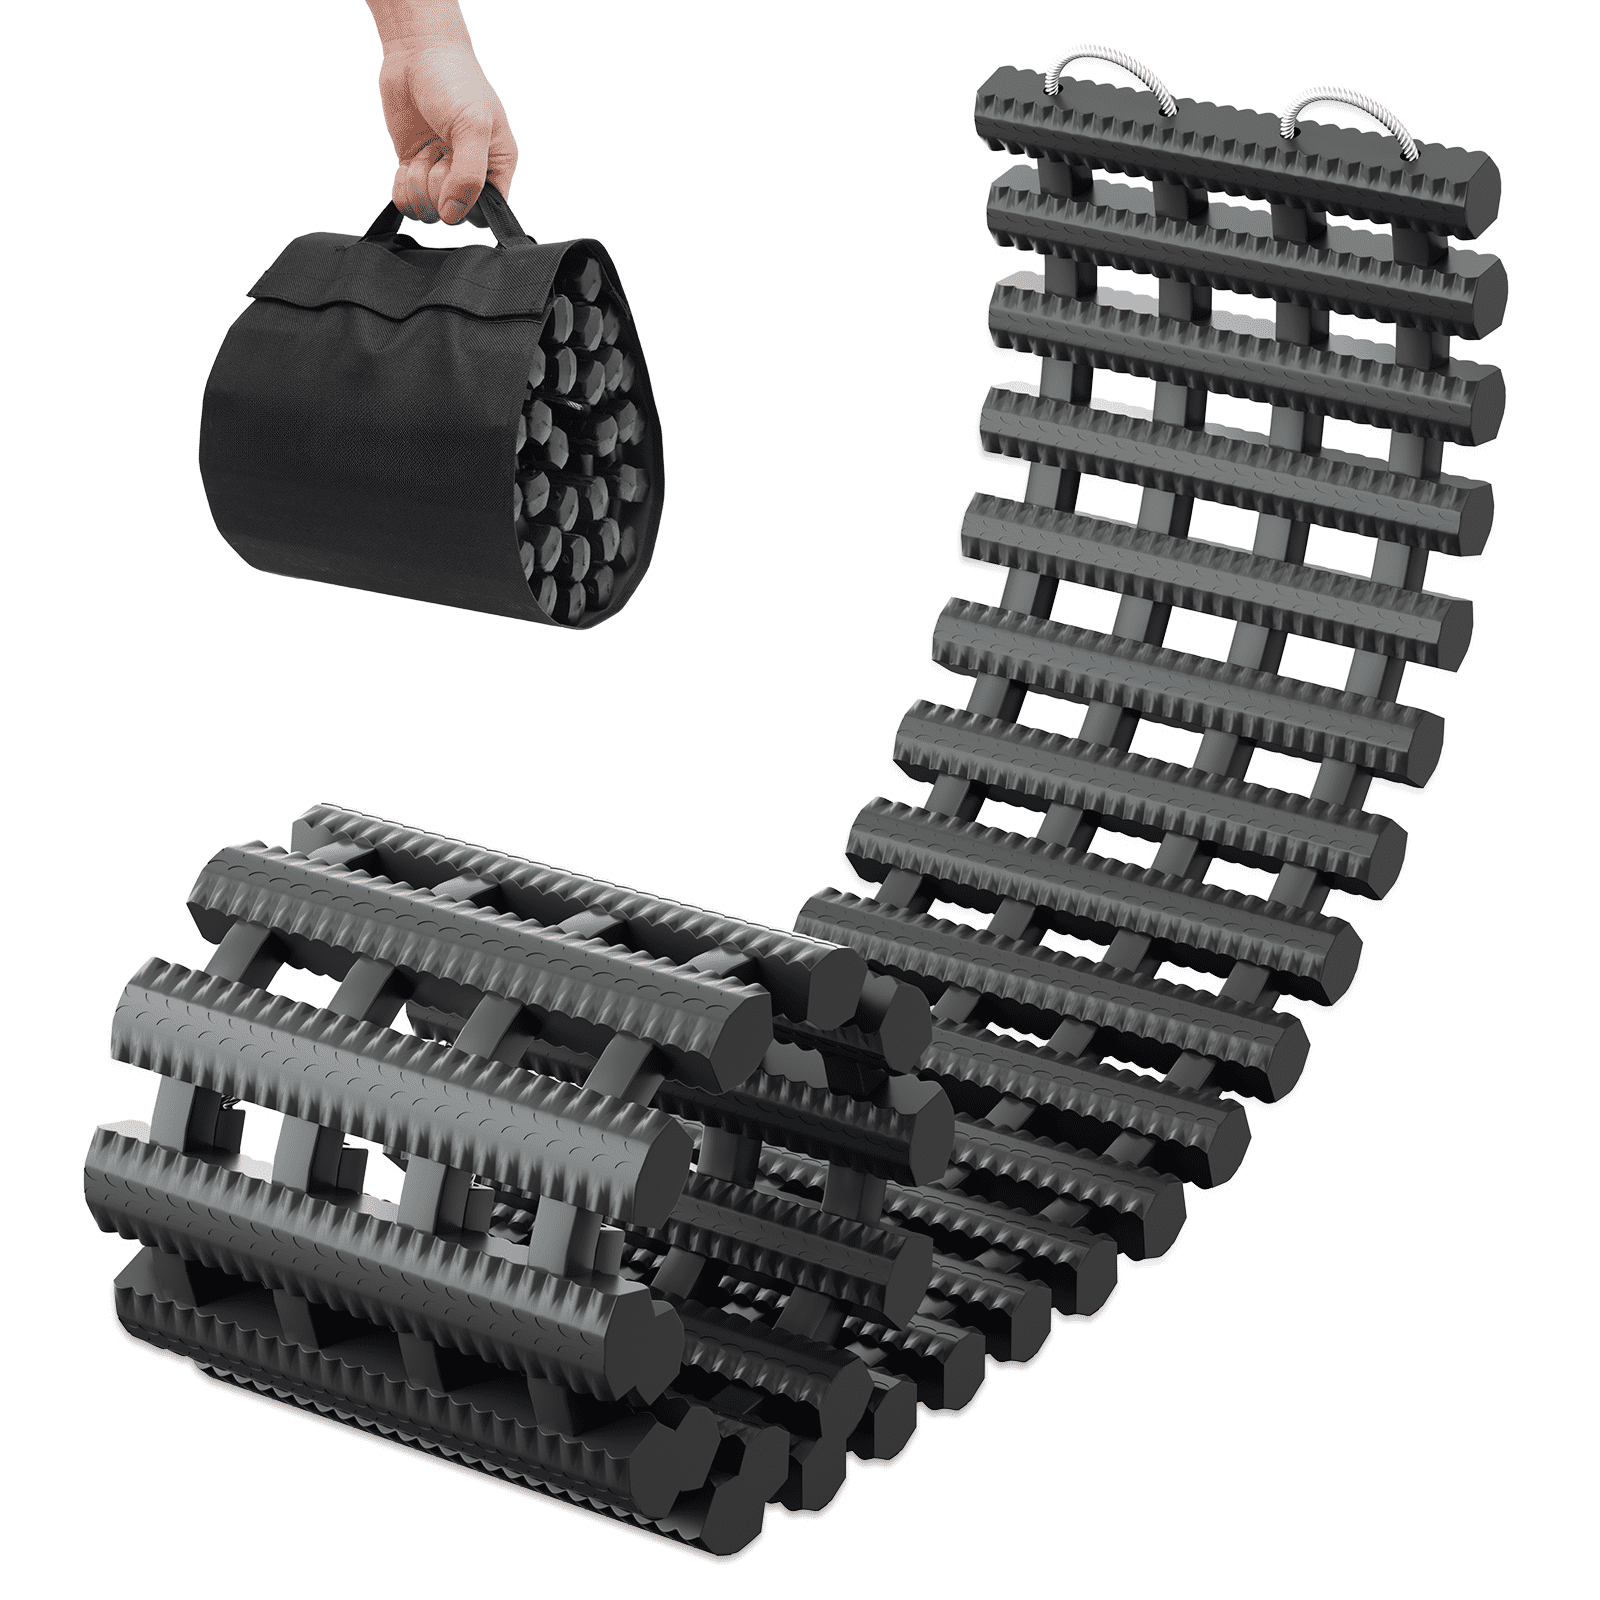 CStern Grip Mat, Rescue Wheel Ladder, Anti Slip Mat, Non-Slip Plate,  Traction Groove, Grip Plates, 2 Pcs Black, for Off-Road Wheels, Tire, Ice,  Mud, Sand, Snow, Stepped Strong, Self Help : 